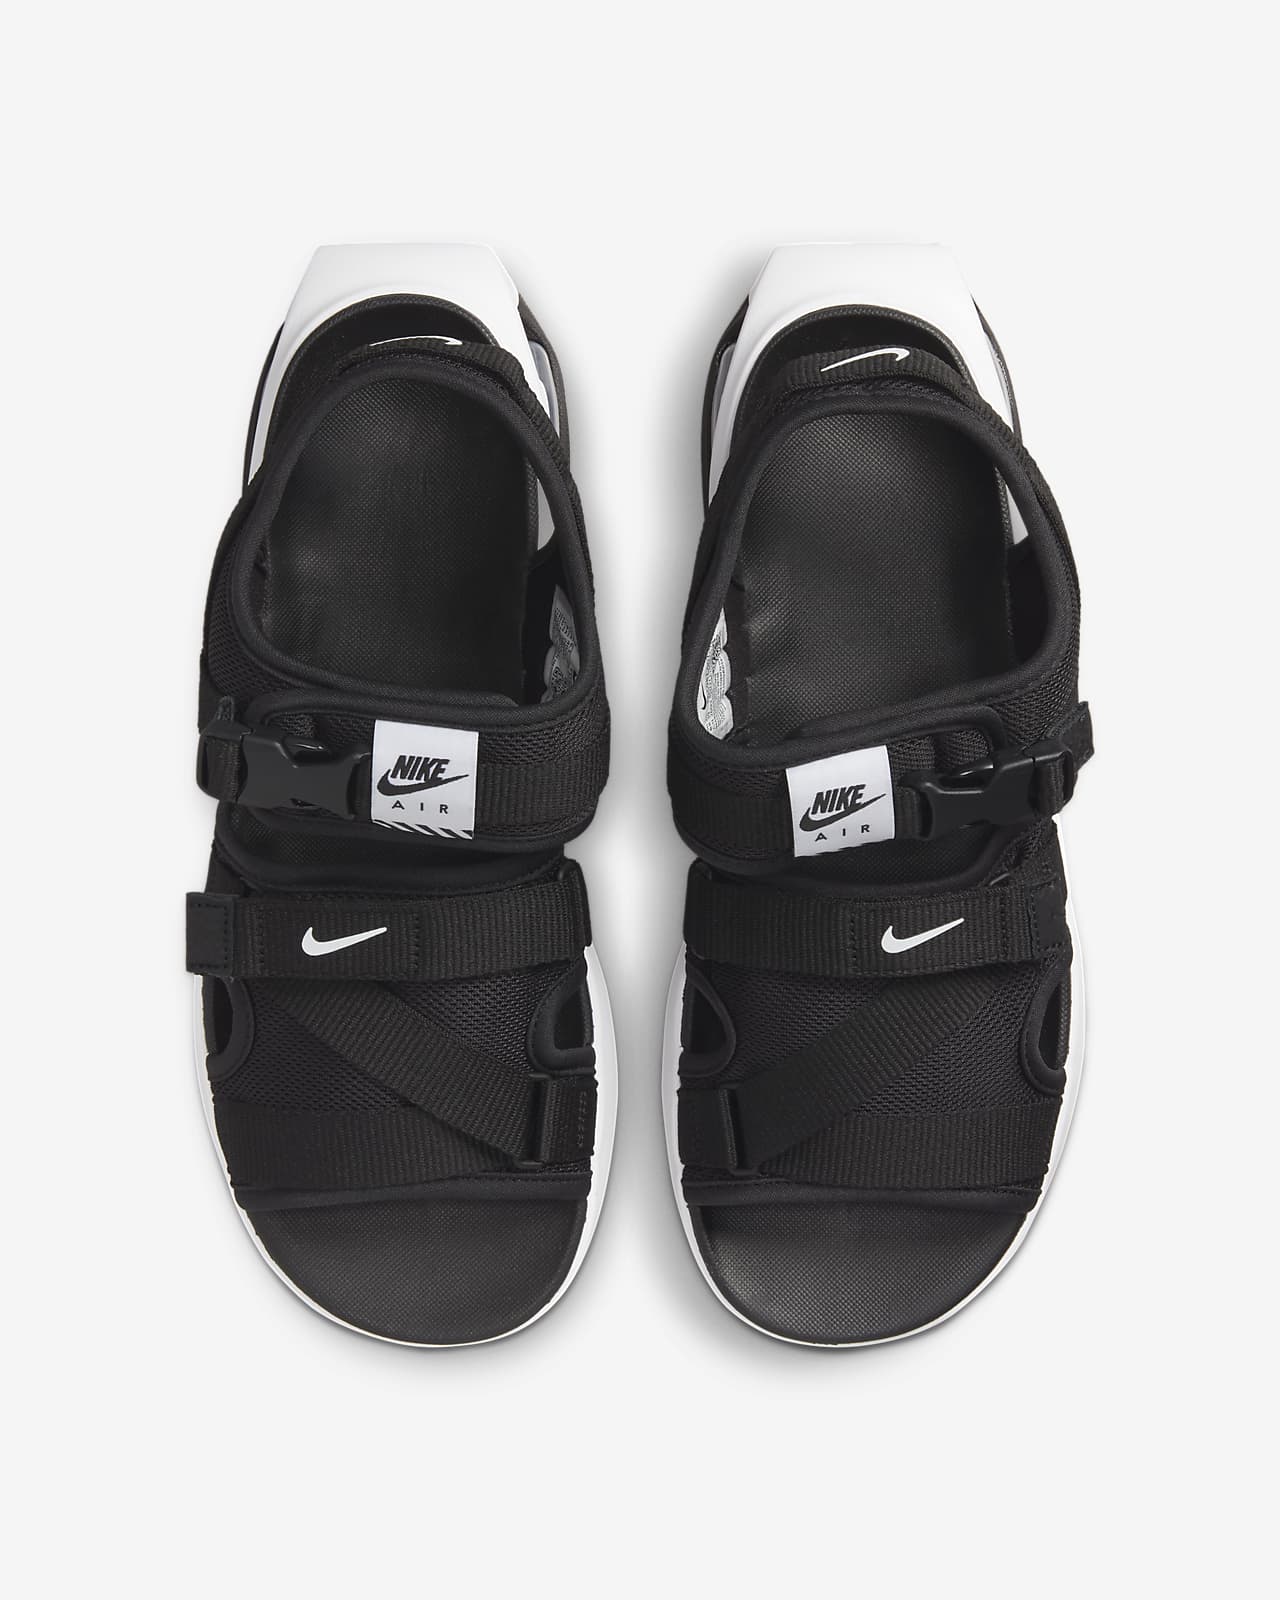 These Nike Sandals Are a Surprise Sneakerhead Favorite | GQ